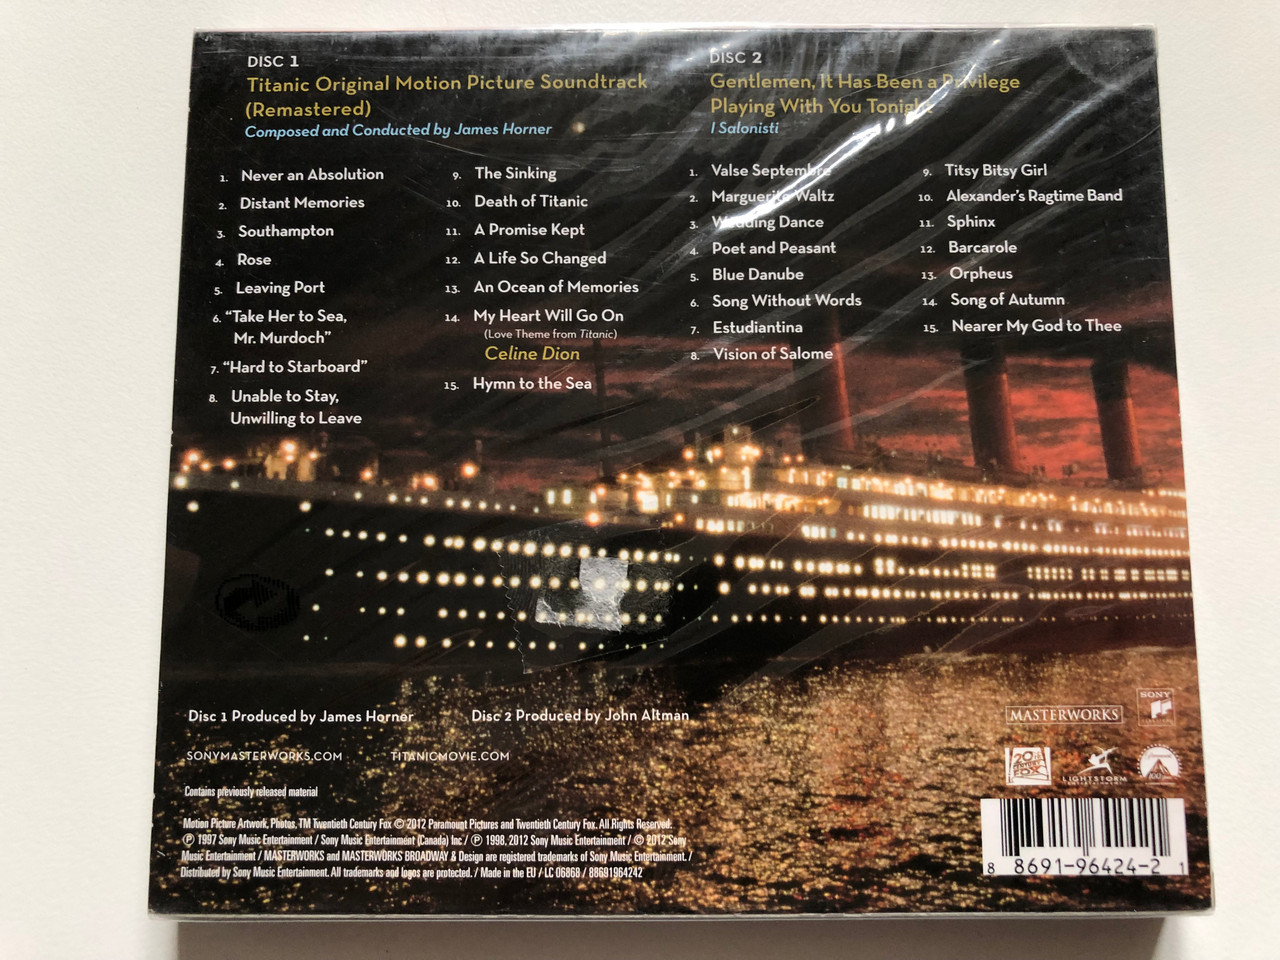 https://cdn10.bigcommerce.com/s-62bdpkt7pb/products/0/images/243552/Titanic_Music_From_The_Motion_Picture_-_Anniversary_Edition_-_Music_Composed_And_Conducted_By_James_Horner_Specially_Priced_2-CD_Set_Masterworks_2x_Audio_CD_2012_88691964242_2__95227.1658999974.1280.1280.JPG?c=2&_gl=1*jfvubq*_ga*MjA2NTIxMjE2MC4xNTkwNTEyNTMy*_ga_WS2VZYPC6G*MTY1ODk5Nzg3OC41MDMuMS4xNjU4OTk5Njc4LjQz